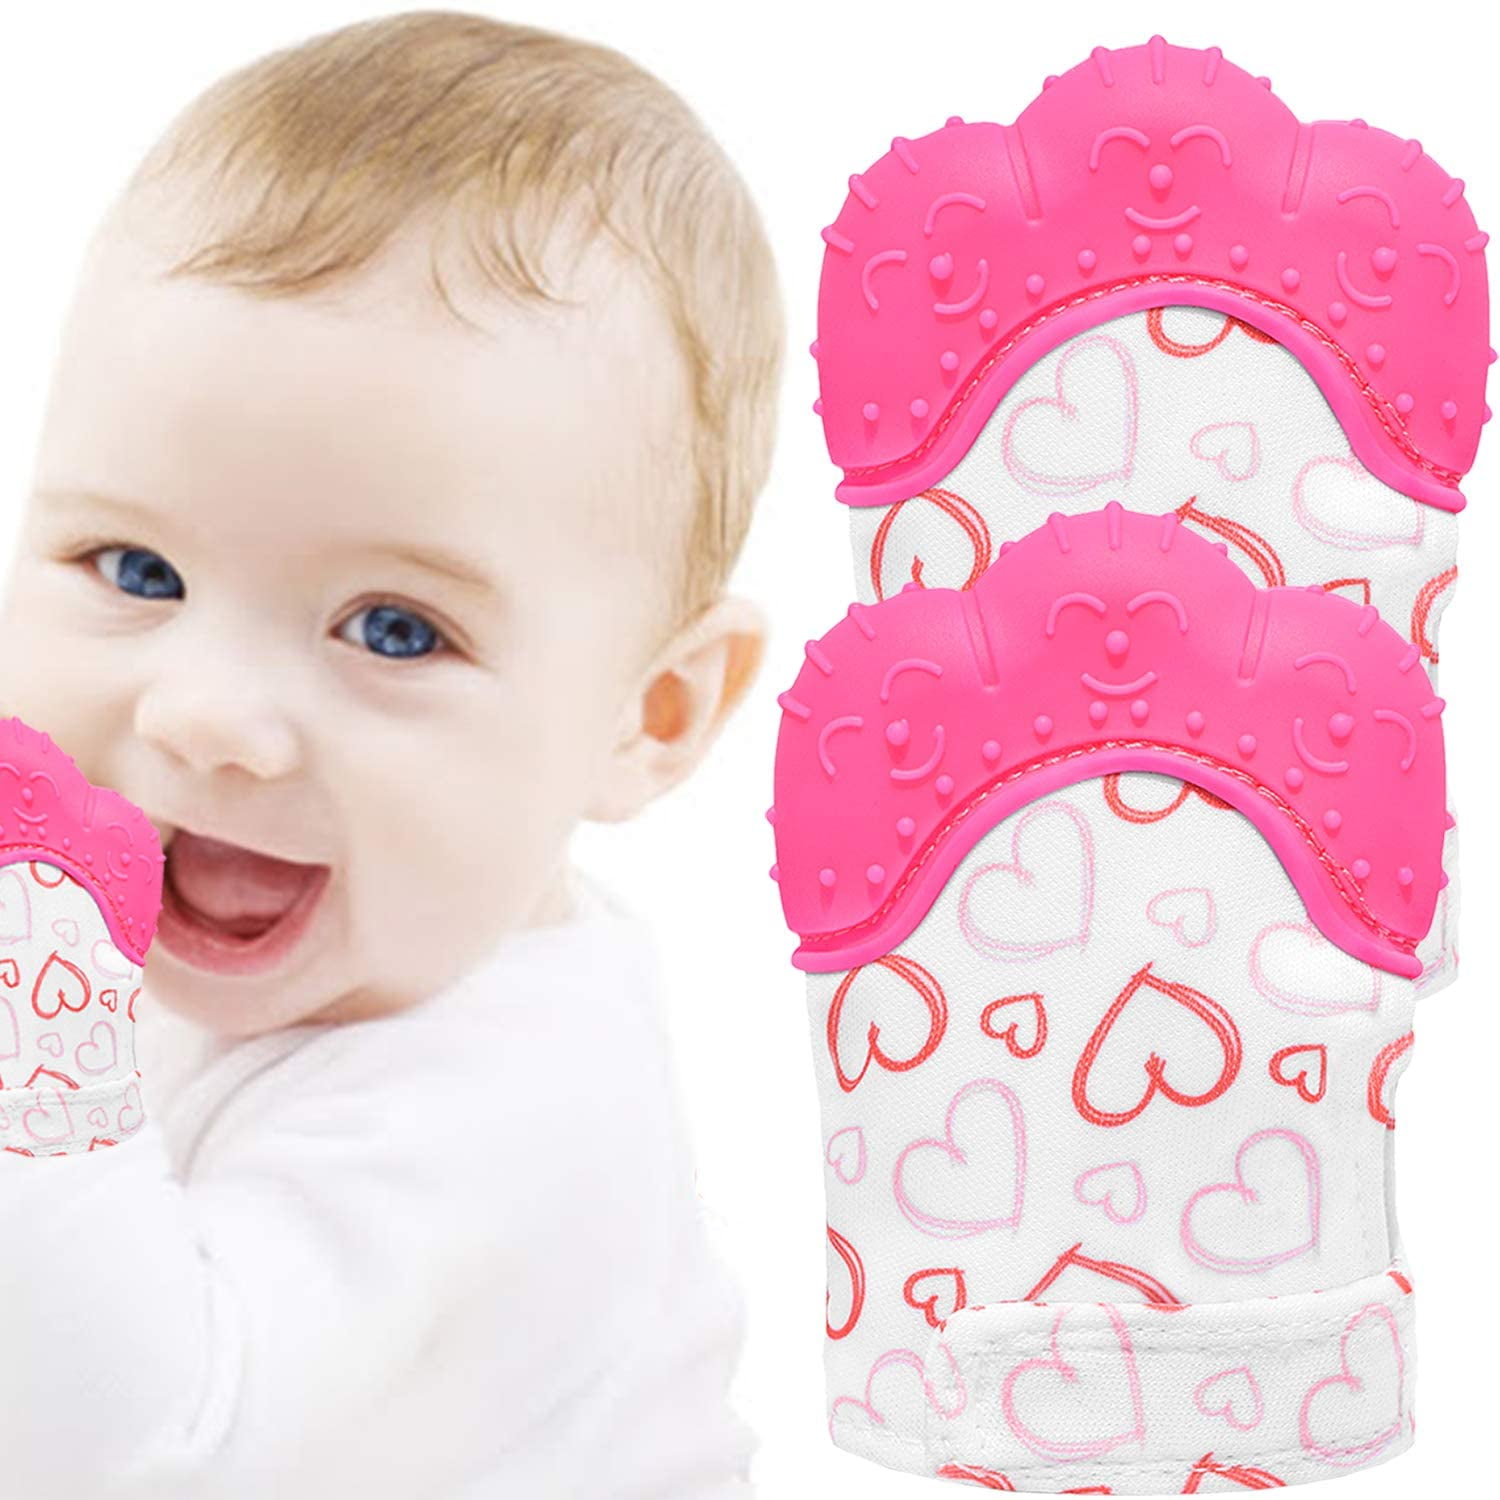 Angzhili 2 Pack Baby Teething Mittens,Safe Silicone Mitten Teether Glove Prevent Scratches Protection Gloves Soothing Pain Relief Mitt Stimulating Teething for Baby Pink